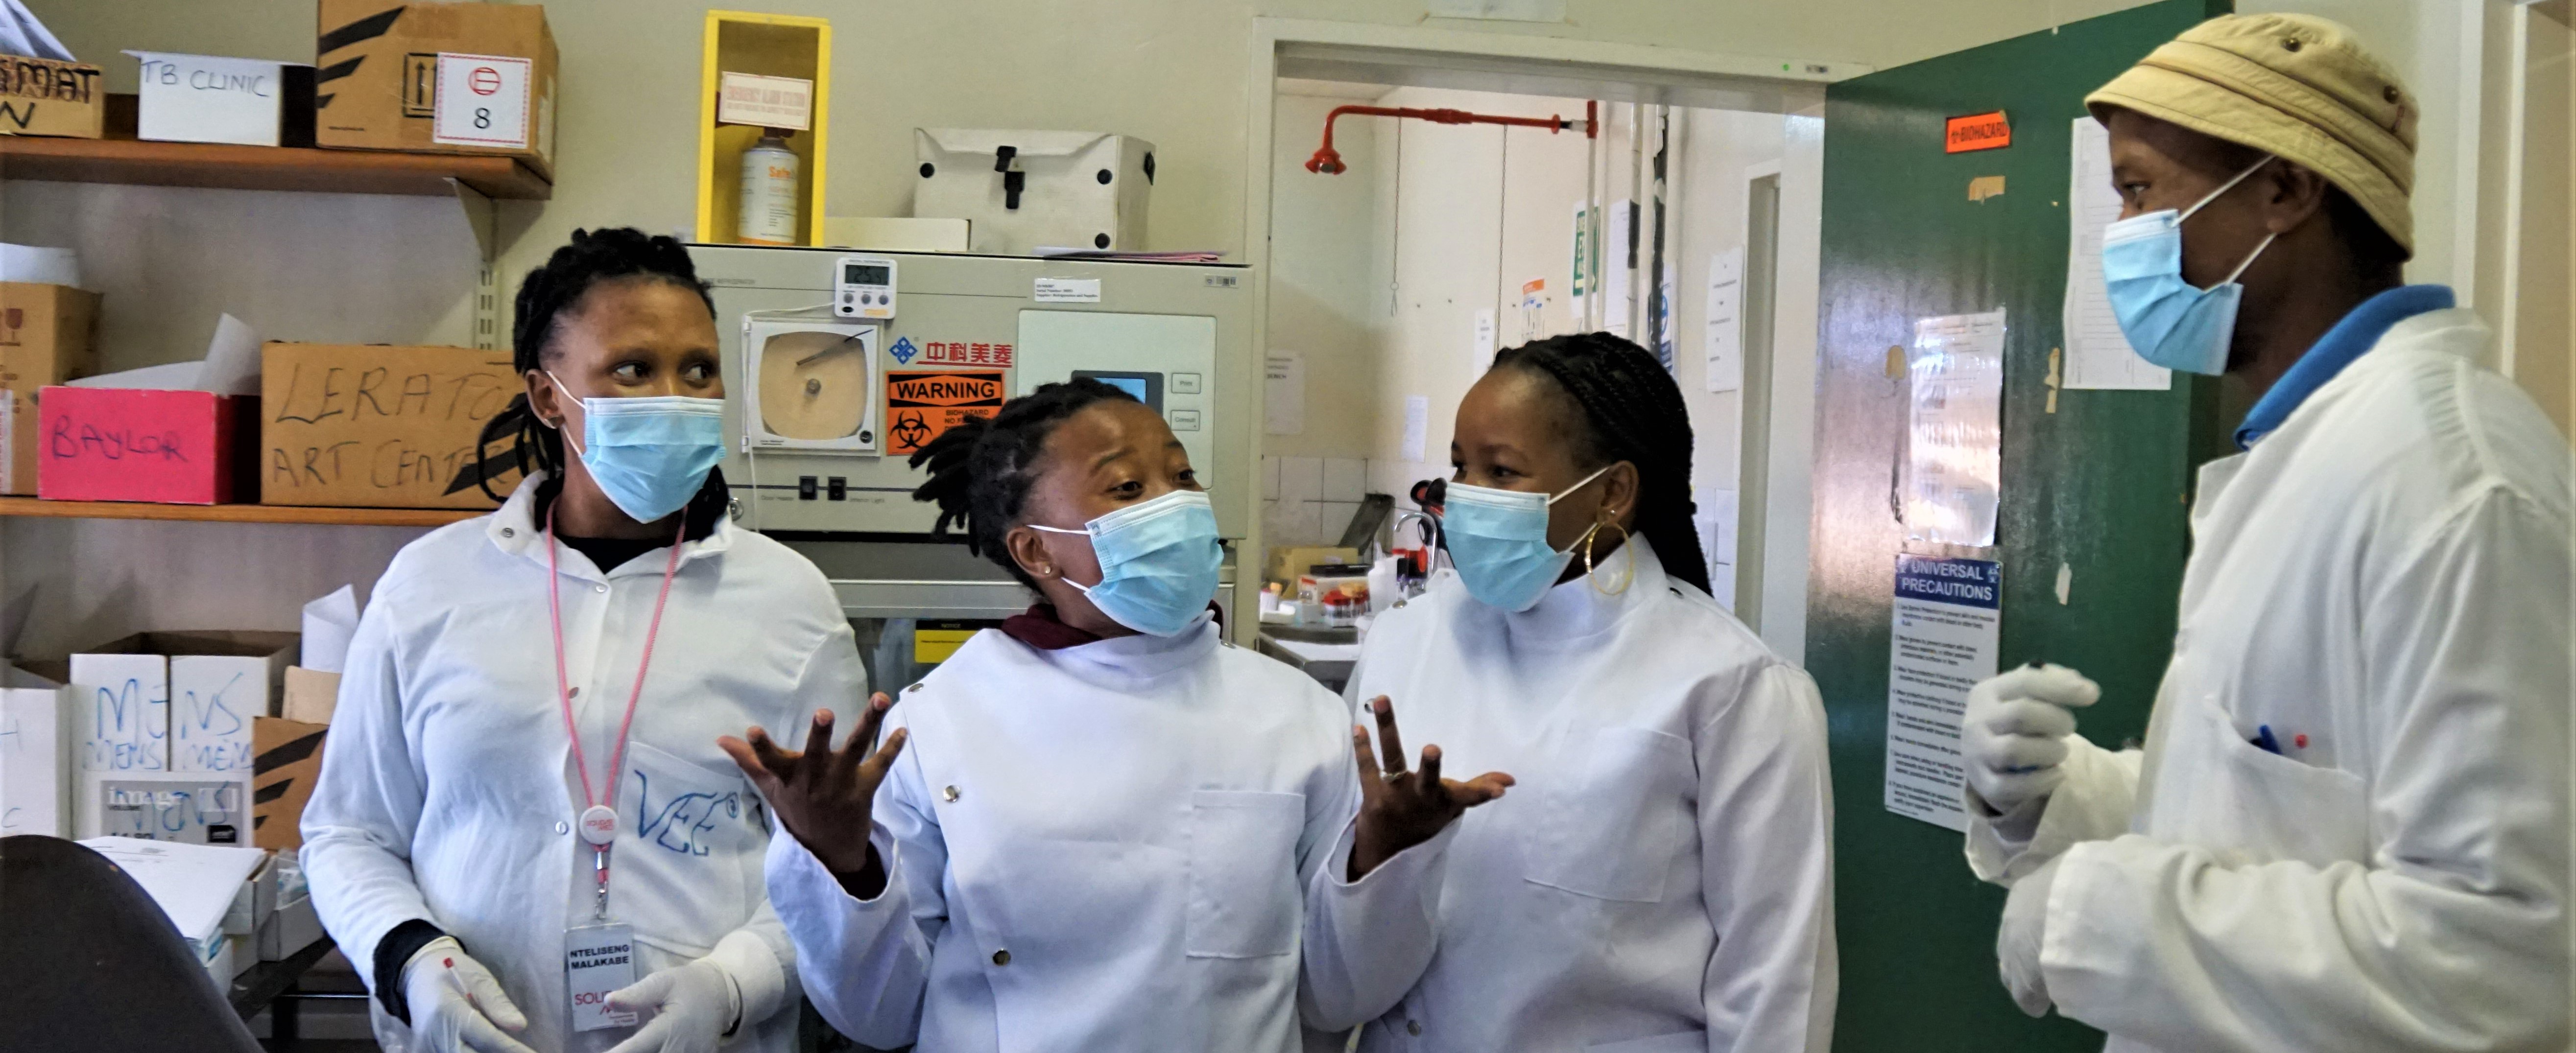 Masked lab techs in Lesotho discuss work in medical office